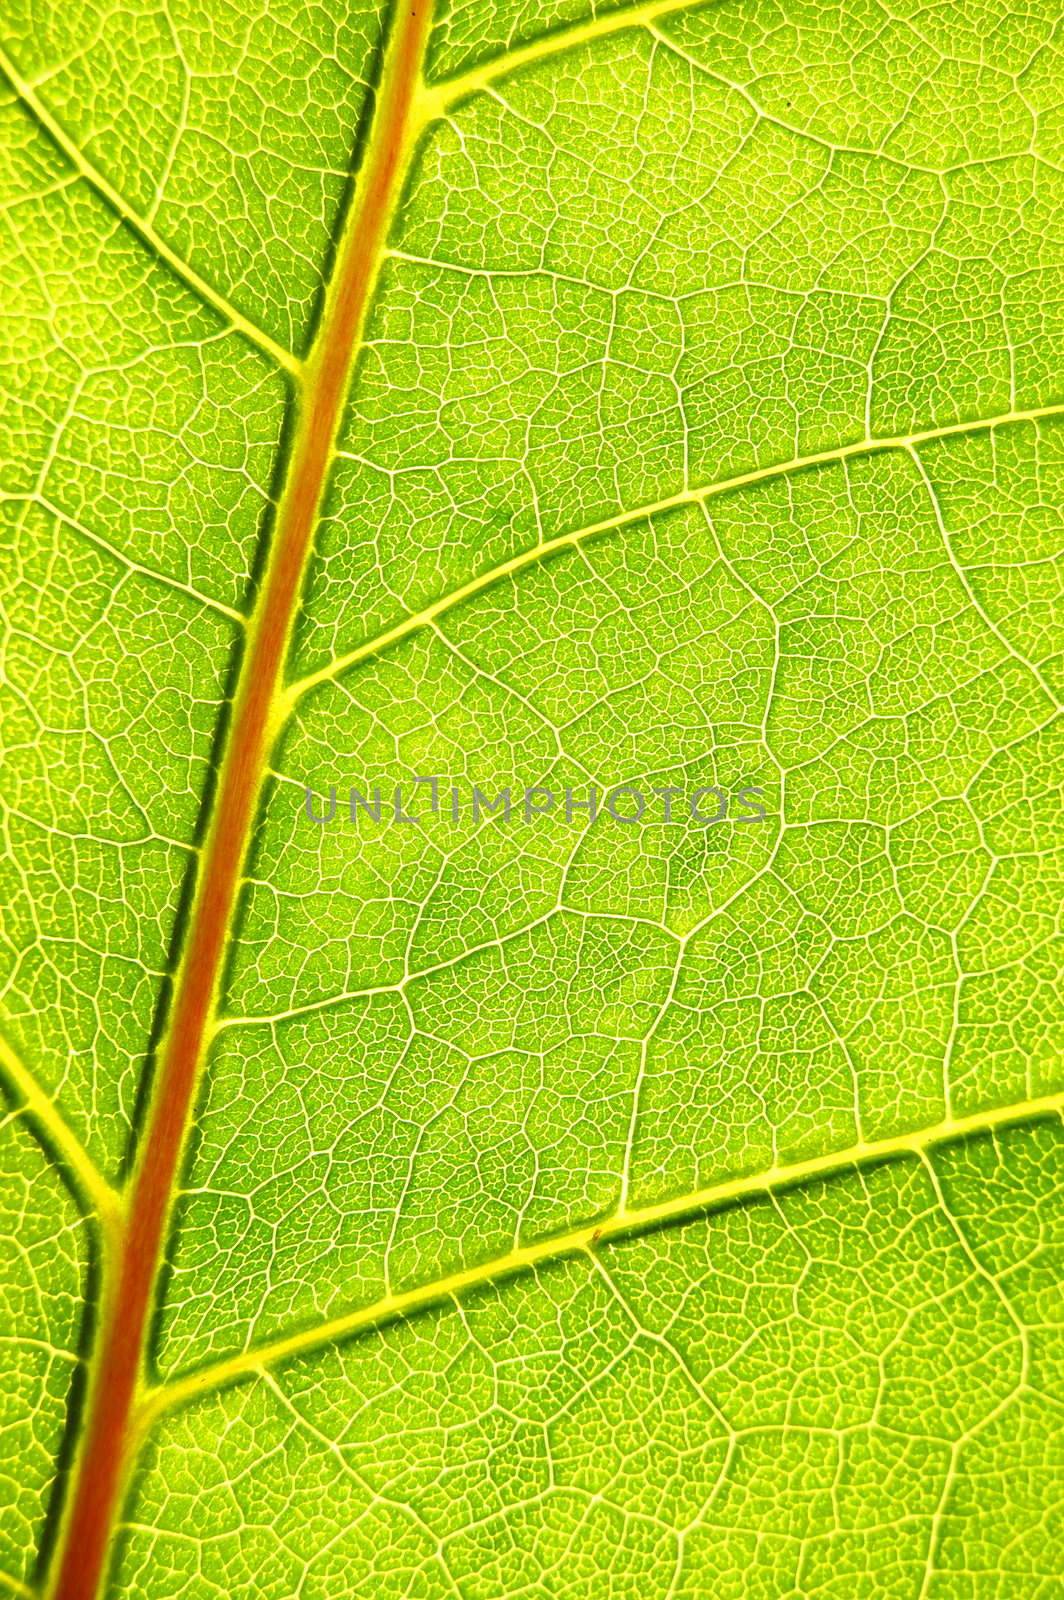 structure and texture of green leaf by gunnar3000